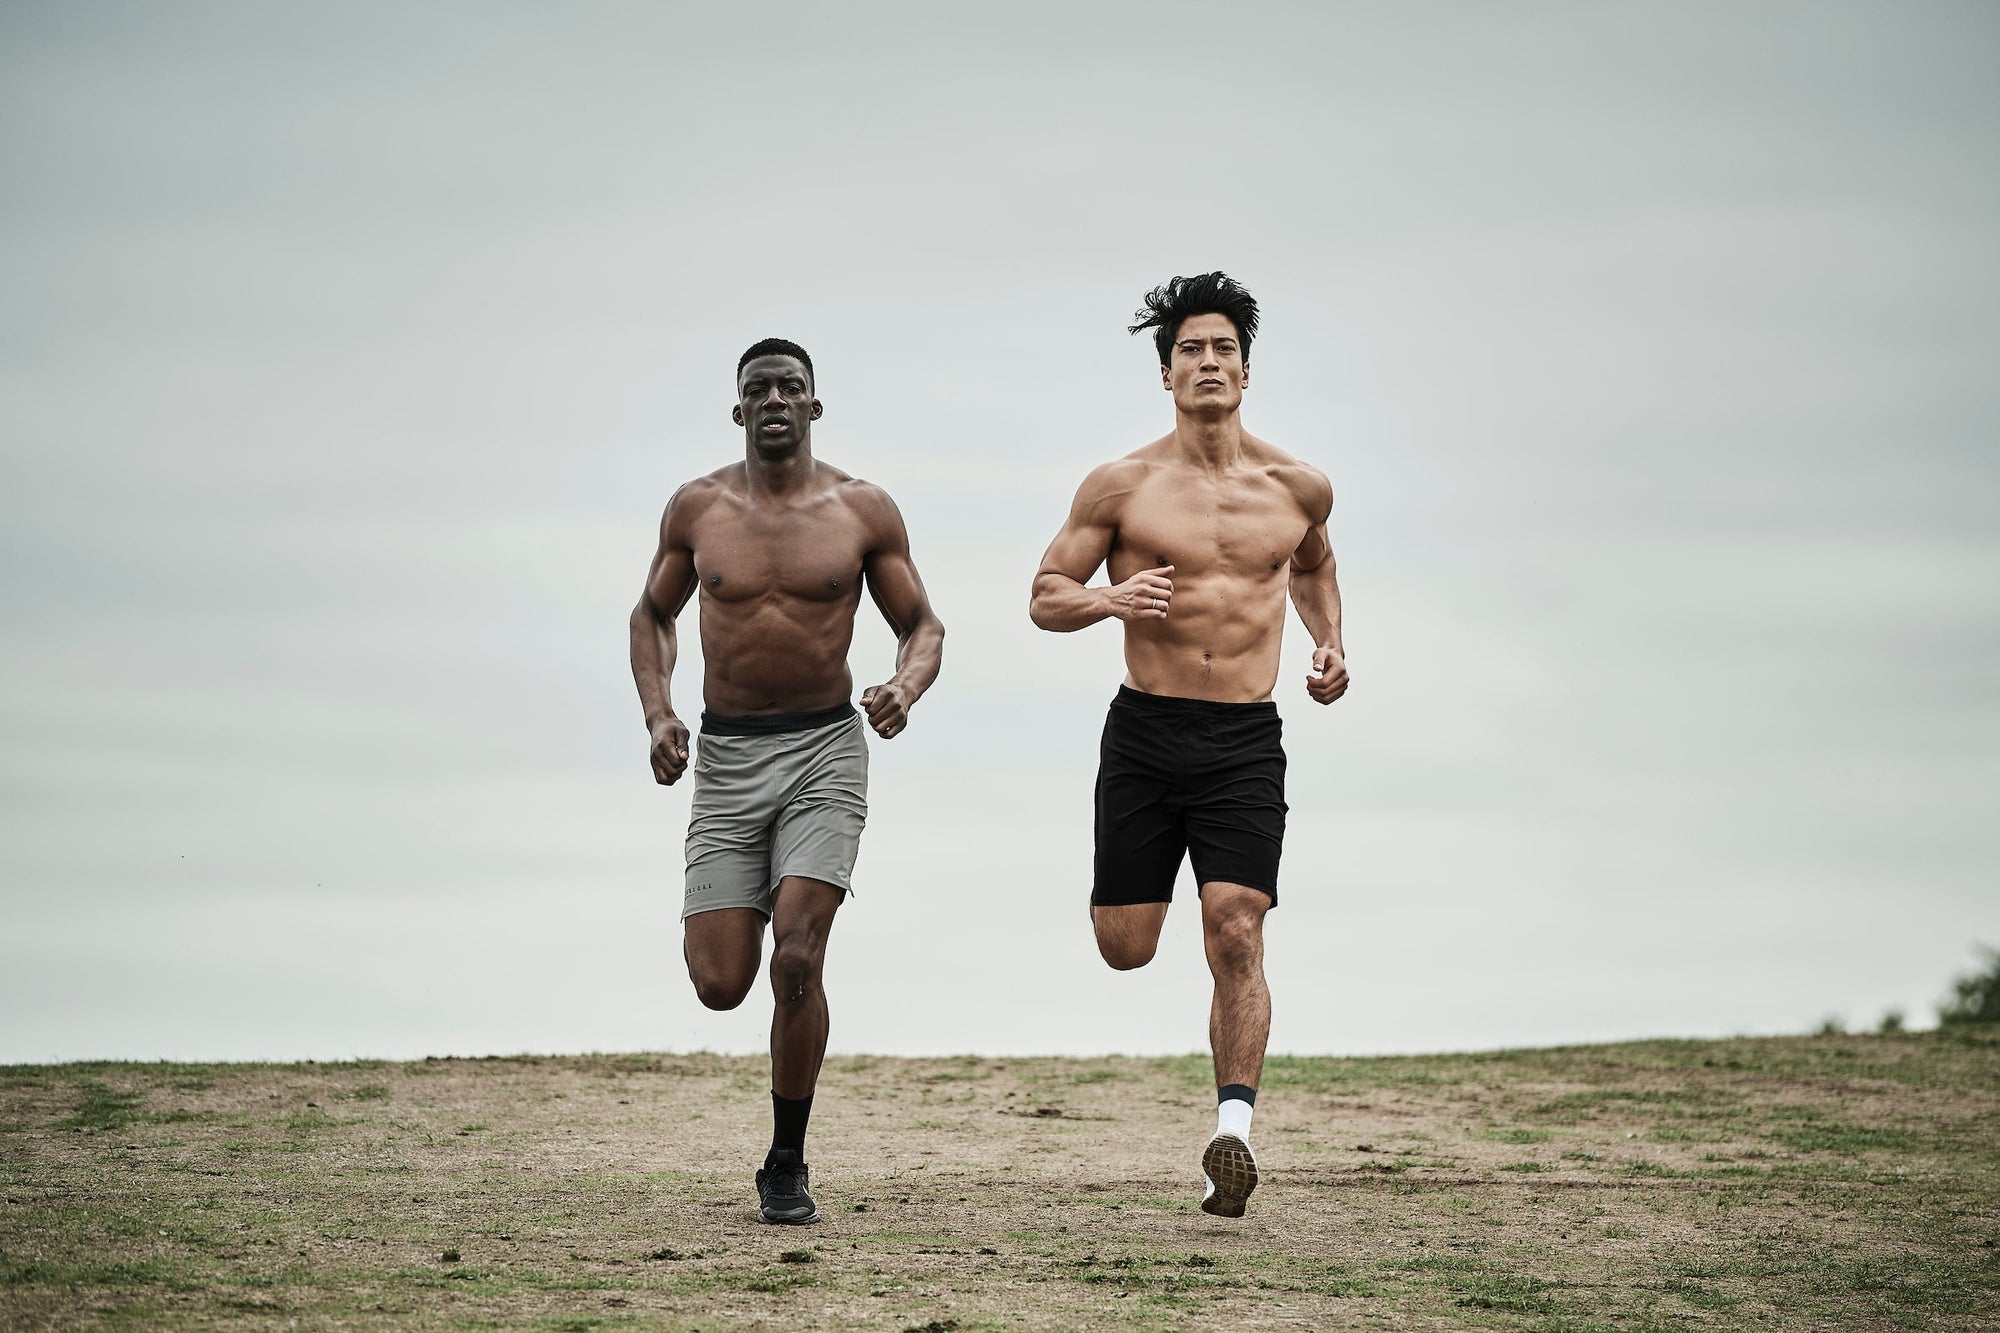 The principles of training: supercharge your fitness